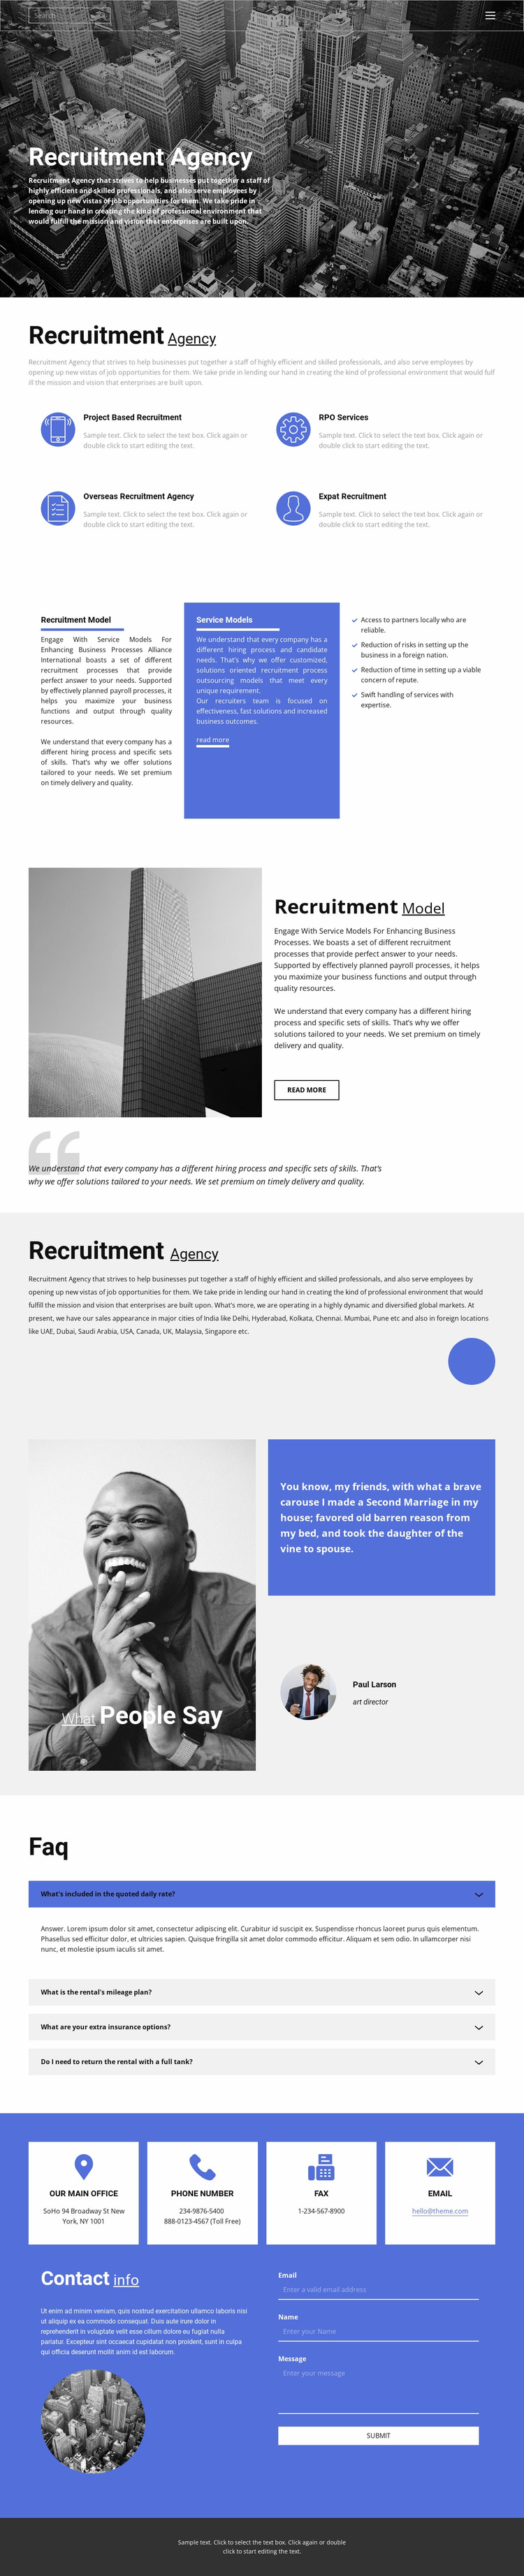 Recruiting agency with good experience Landing Page